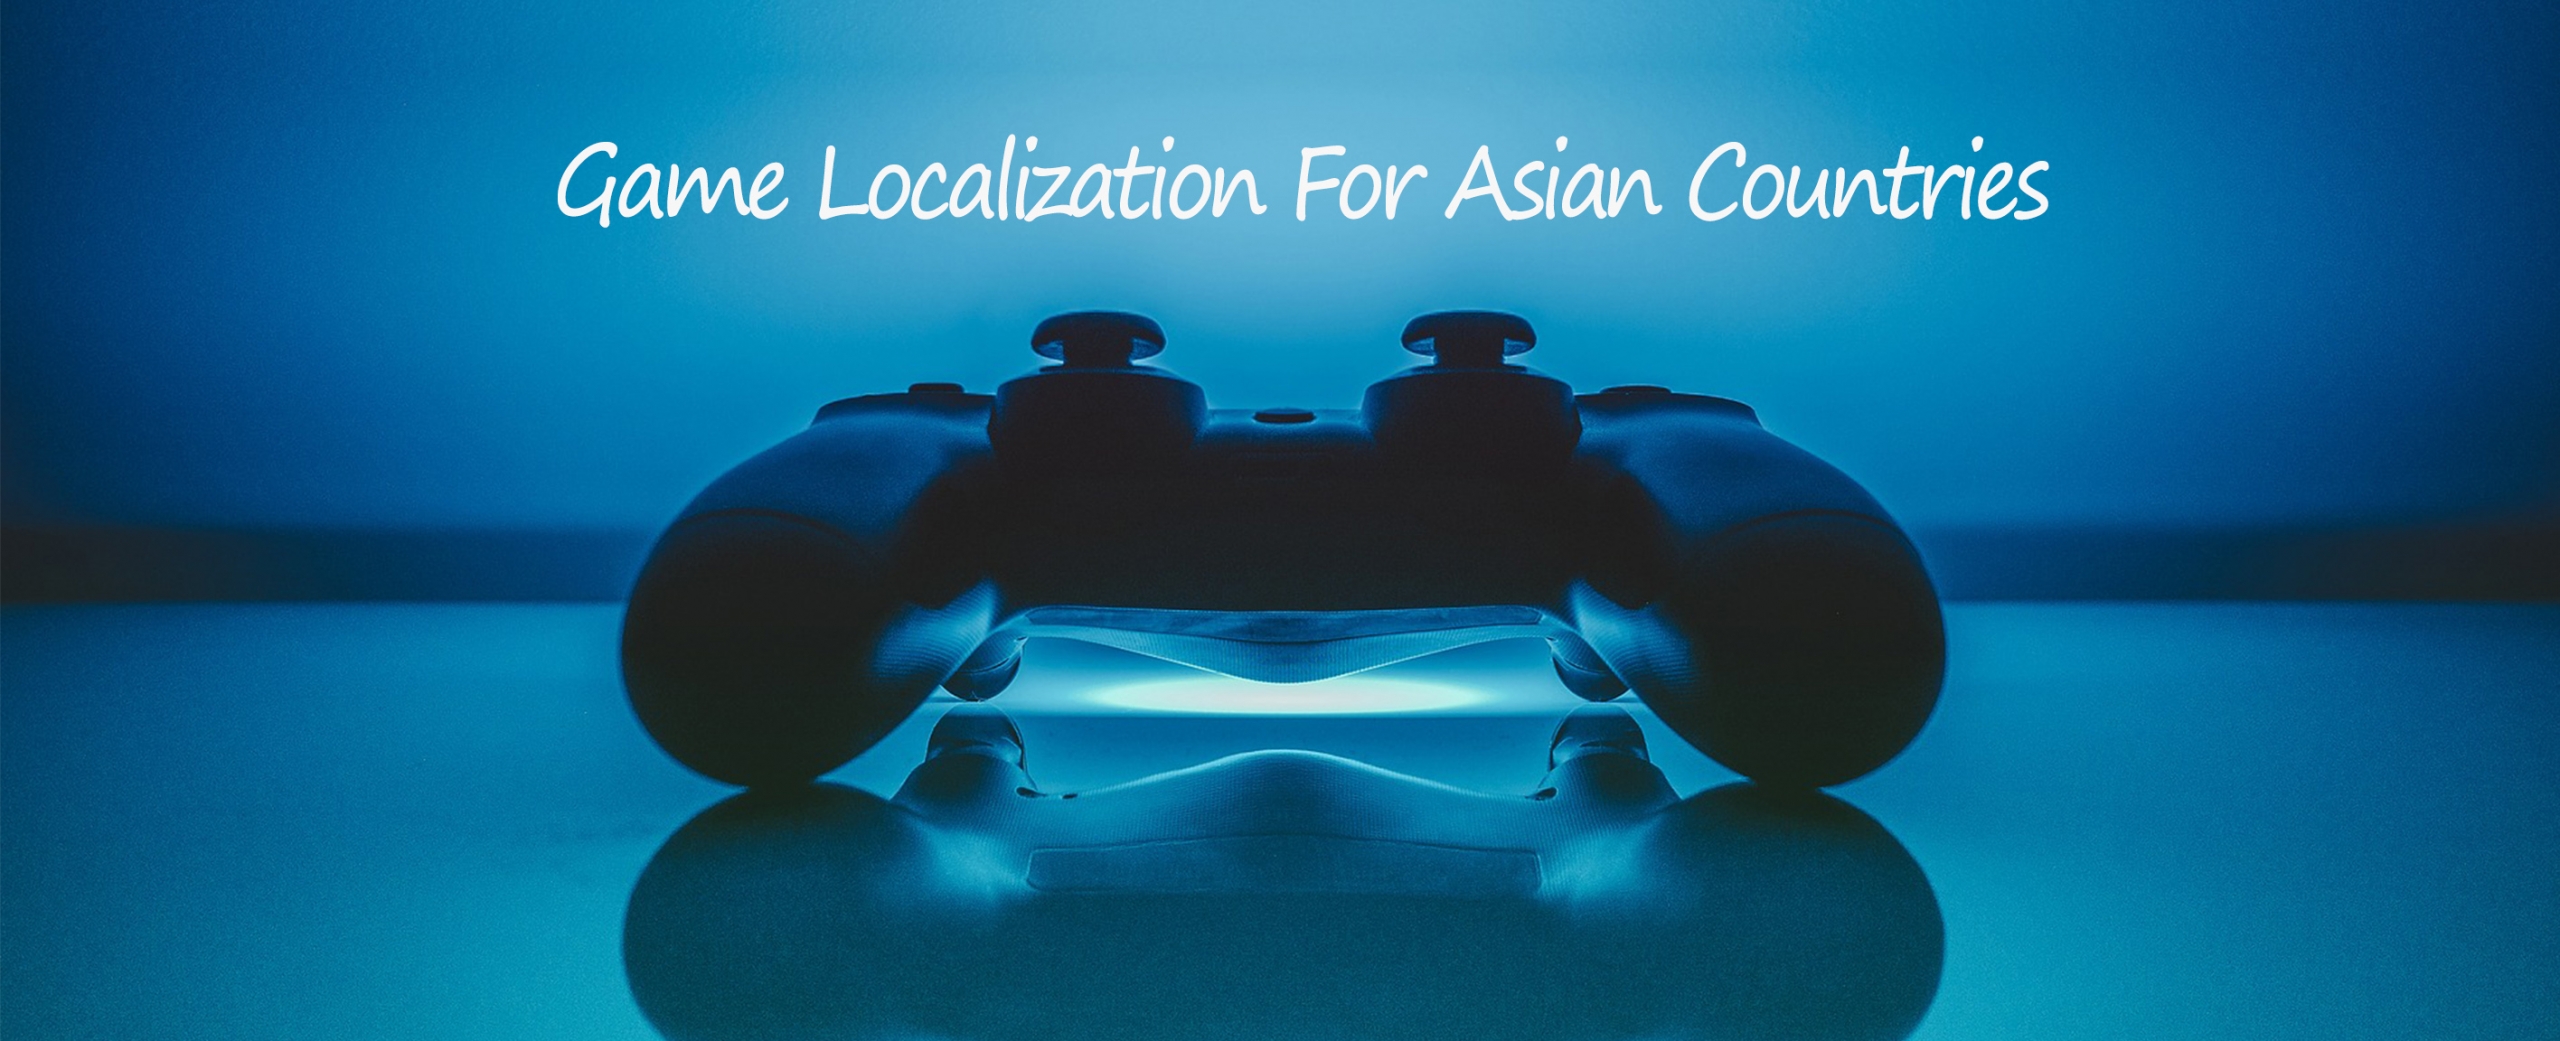 Game Localization For Asian Countries